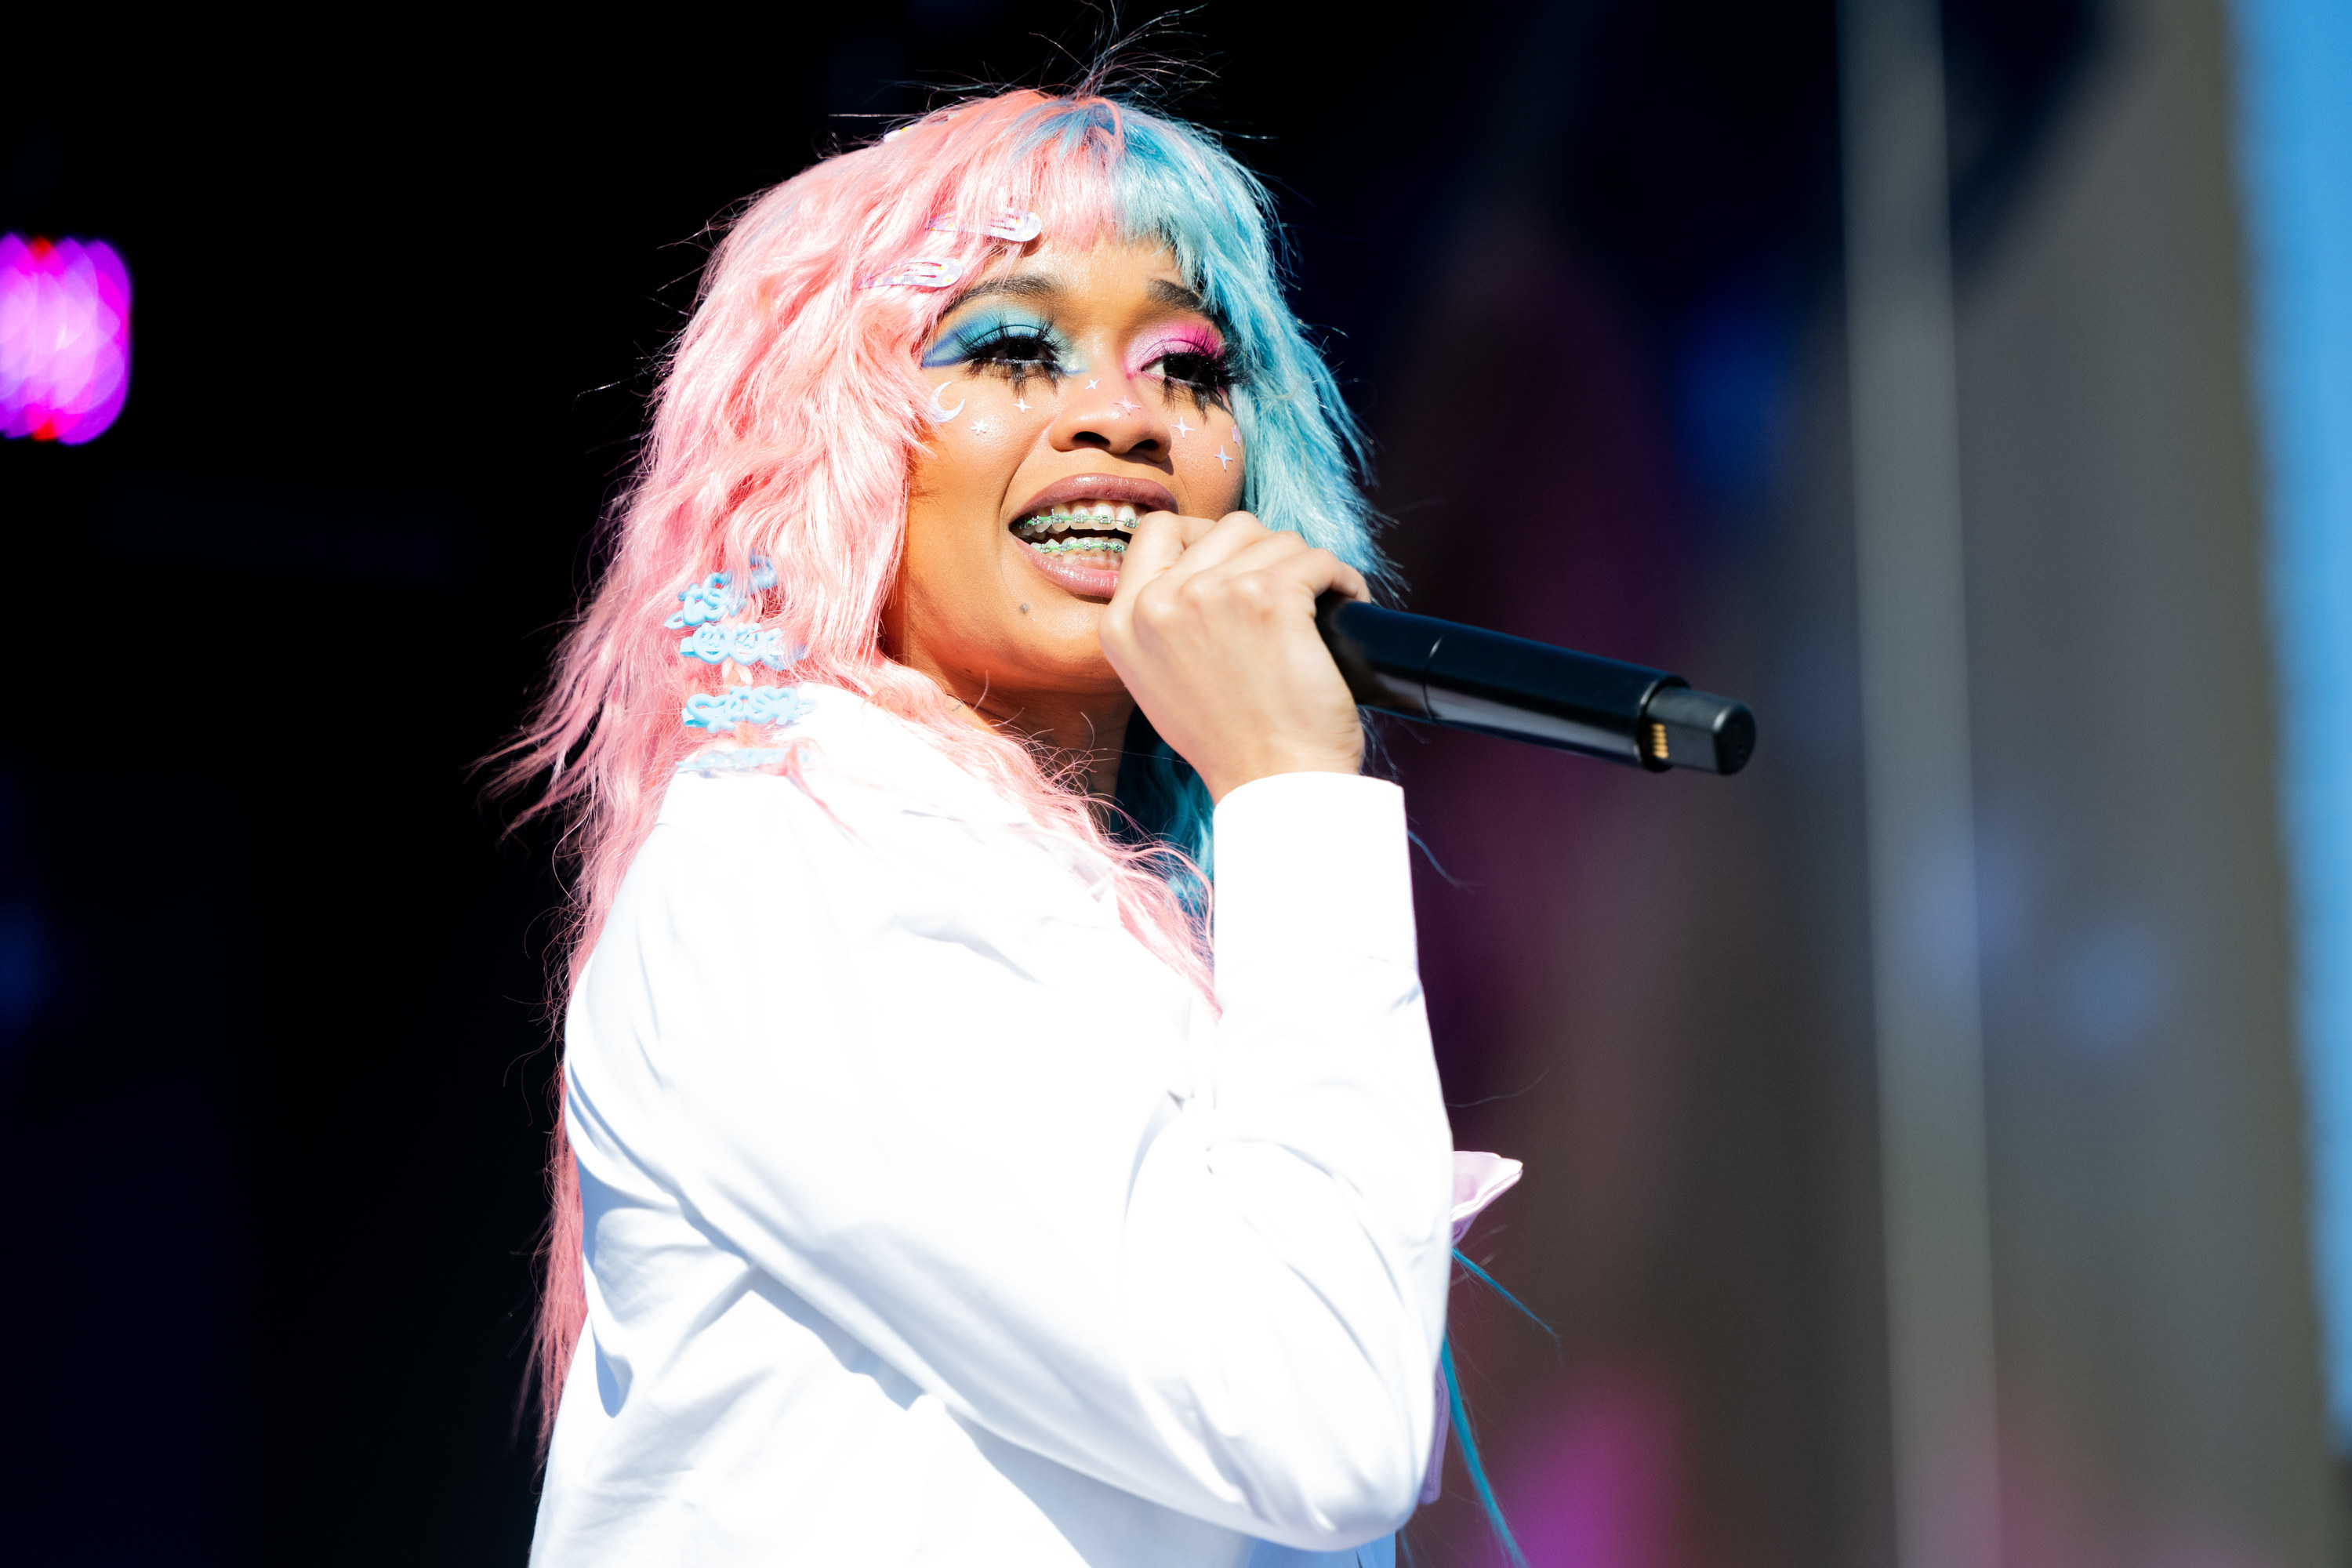 Tiacorine performing on stage. Tiacorine is rocking two-toned hair and two-toned eyeshadow